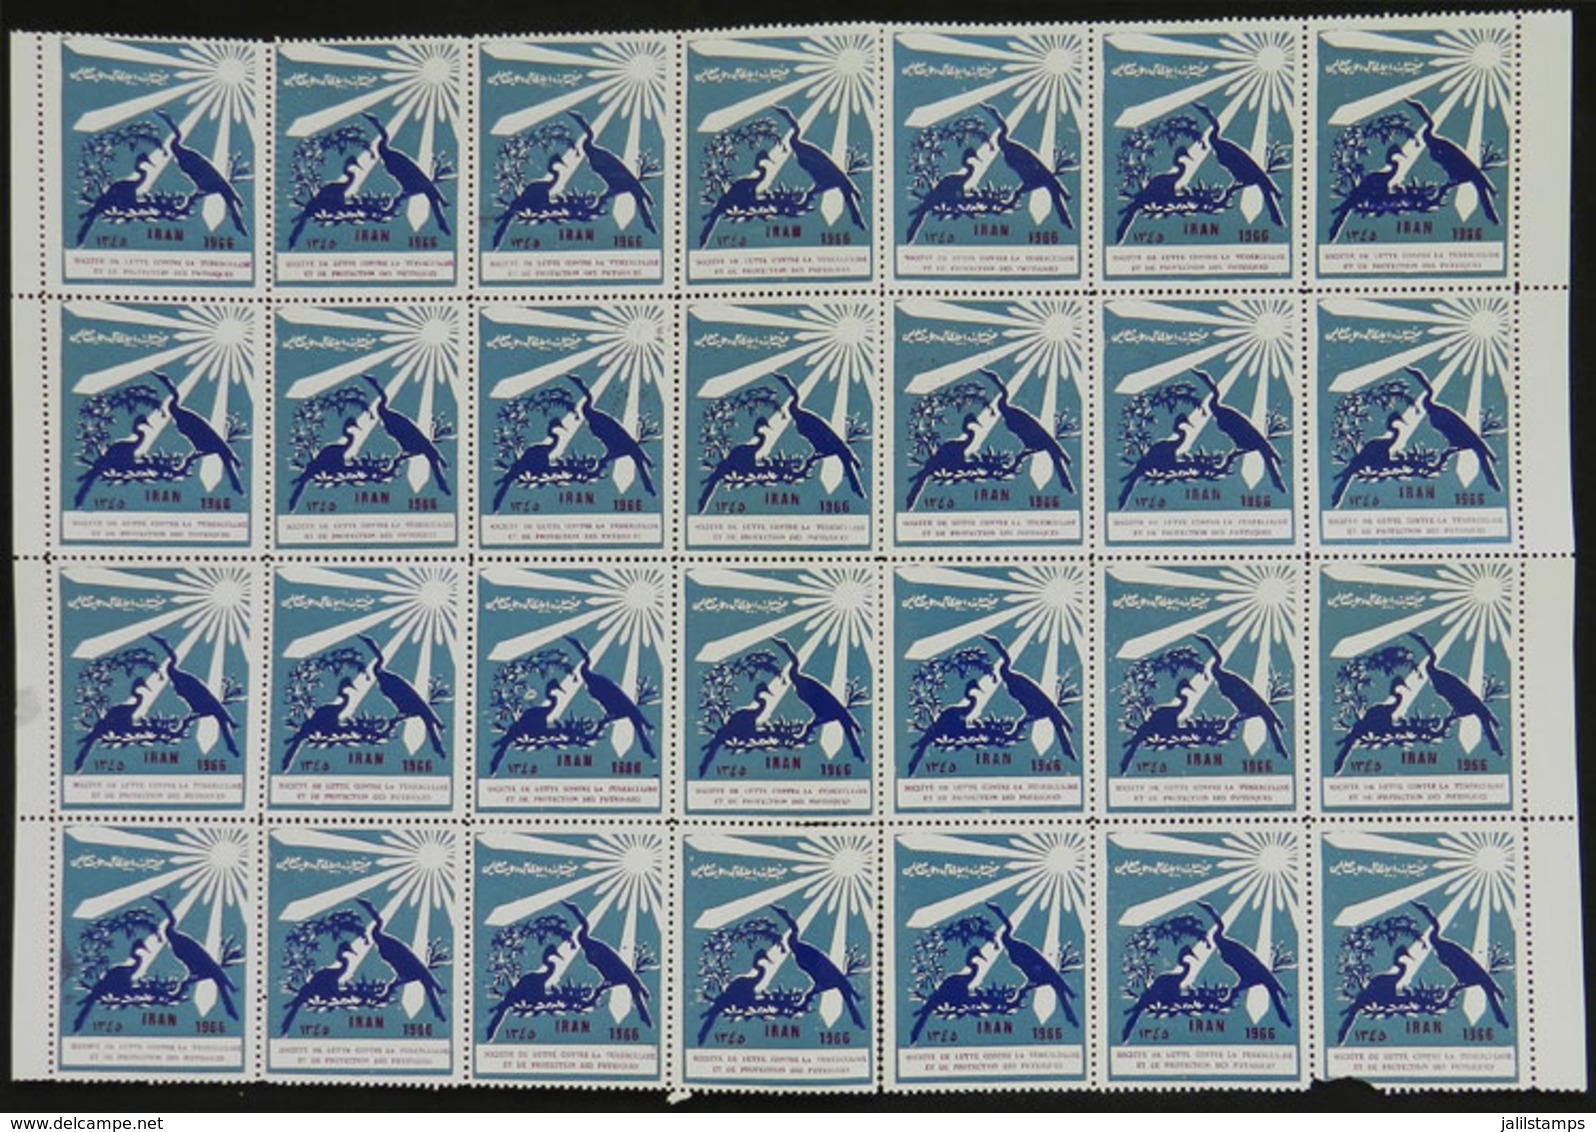 IRAN: FIGHT AGAINST TUBERCULOSIS: 1966 Issue, Large Block Of 28 Cinderellas, MNH, 2 Or 3 With Defects, Excellent General - Iran